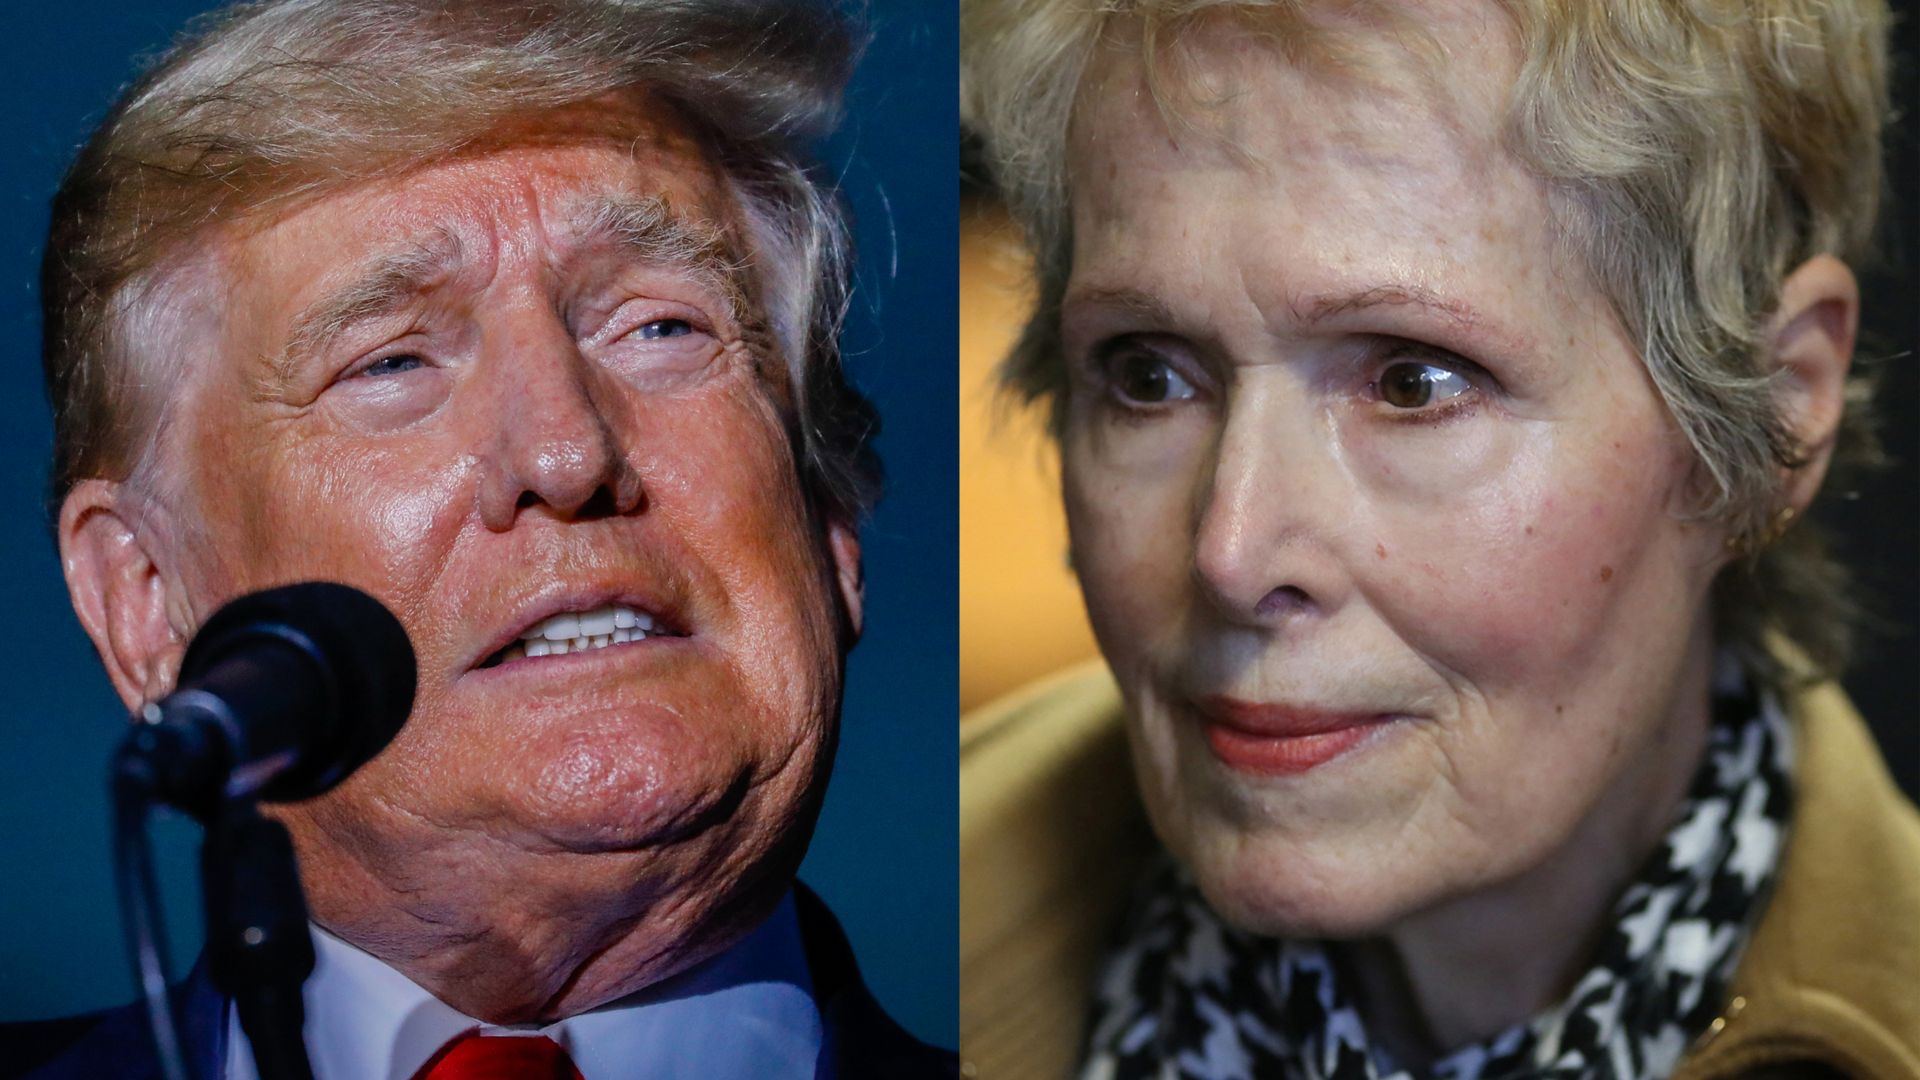 Photo of Donald Trump speaking on the left and E. Jean Carroll looking intently on the right